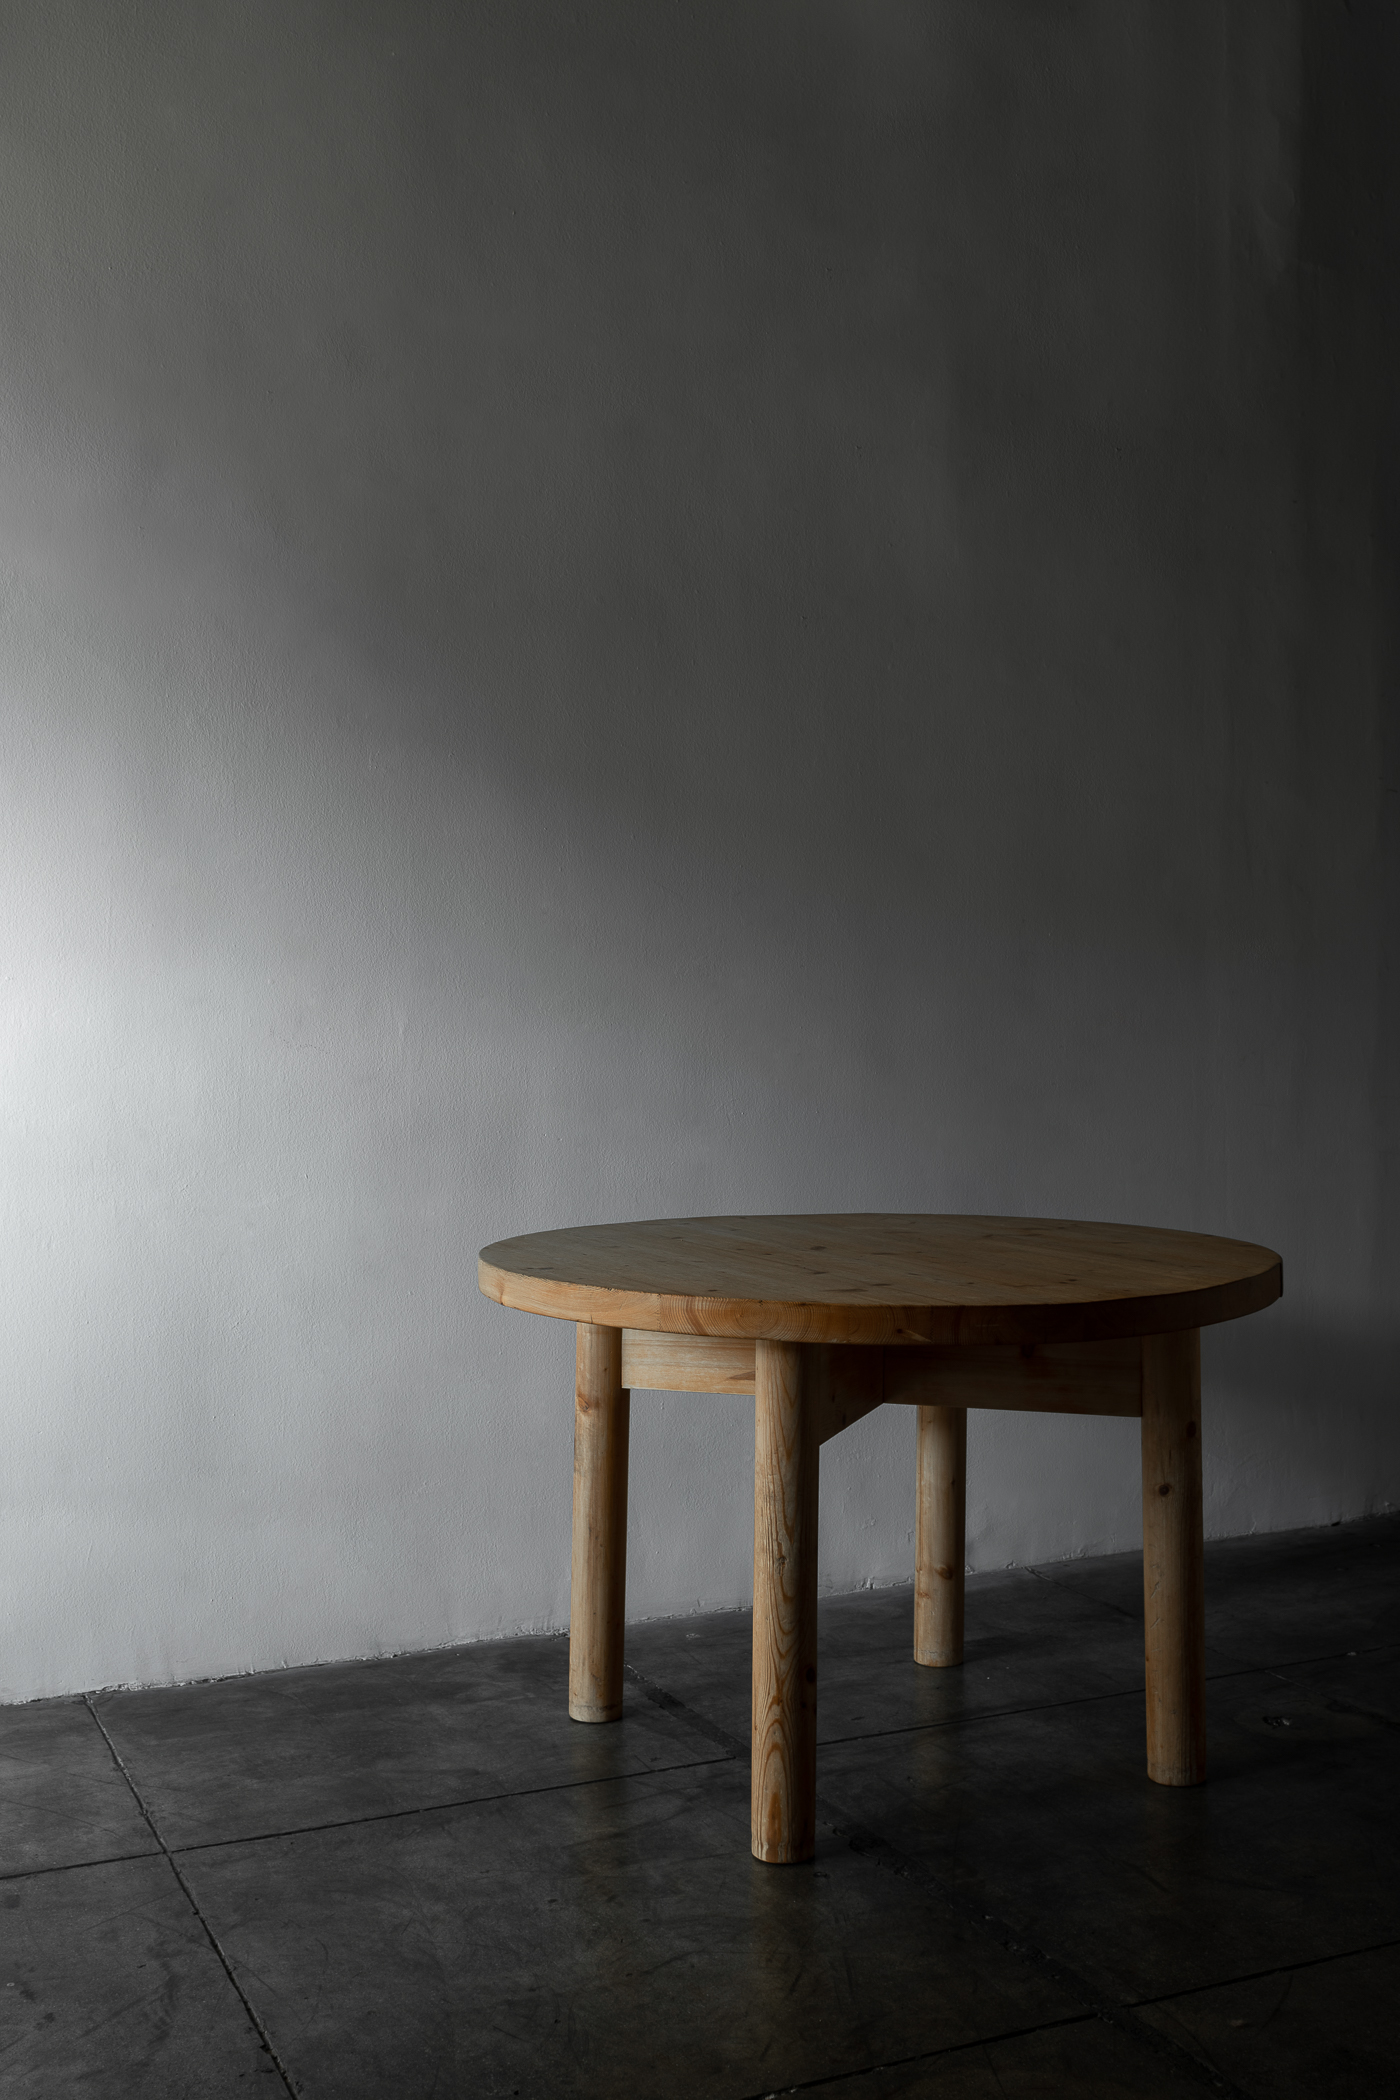 Round pine table by Charlotte Perriand.